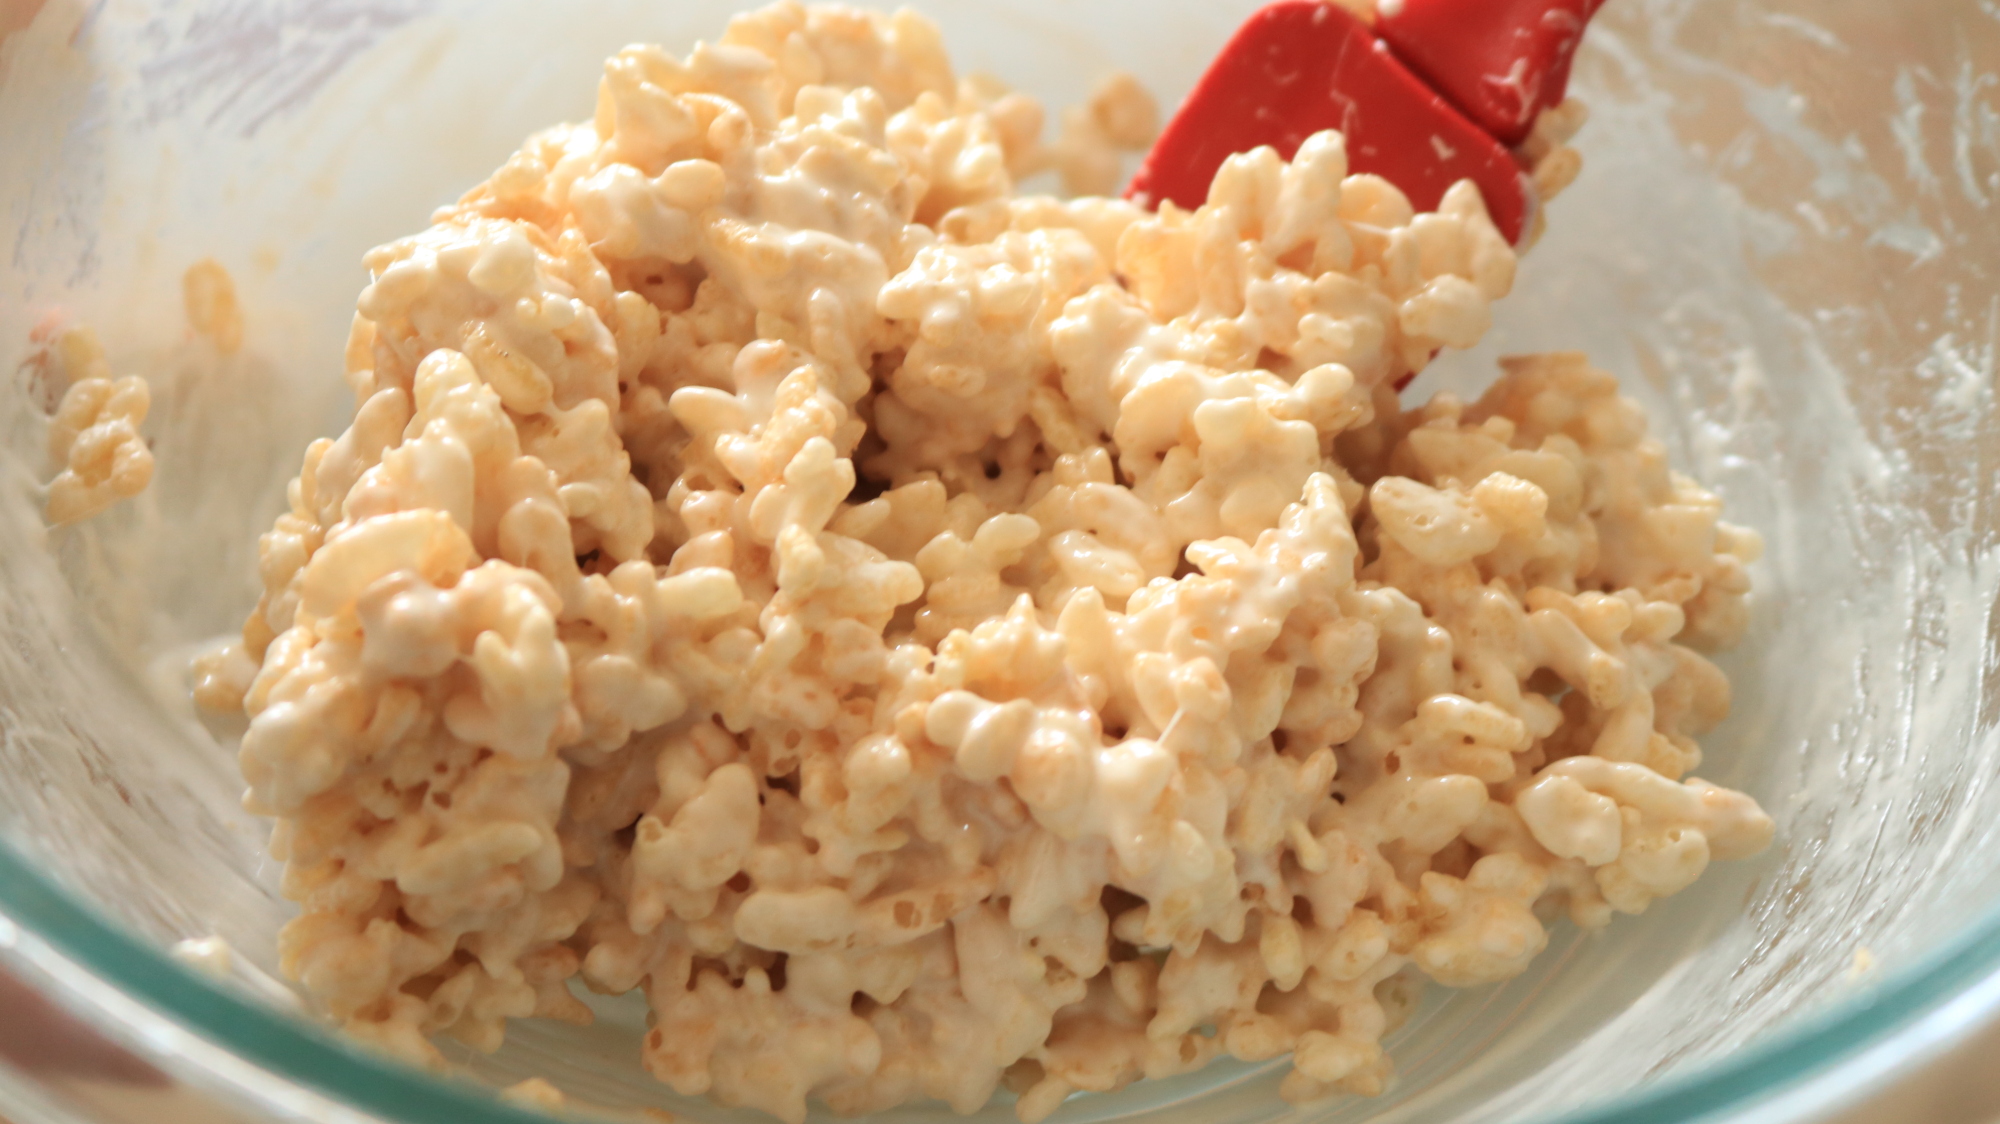 A small mound of Rice Krispies Treat mixture in a bowl.